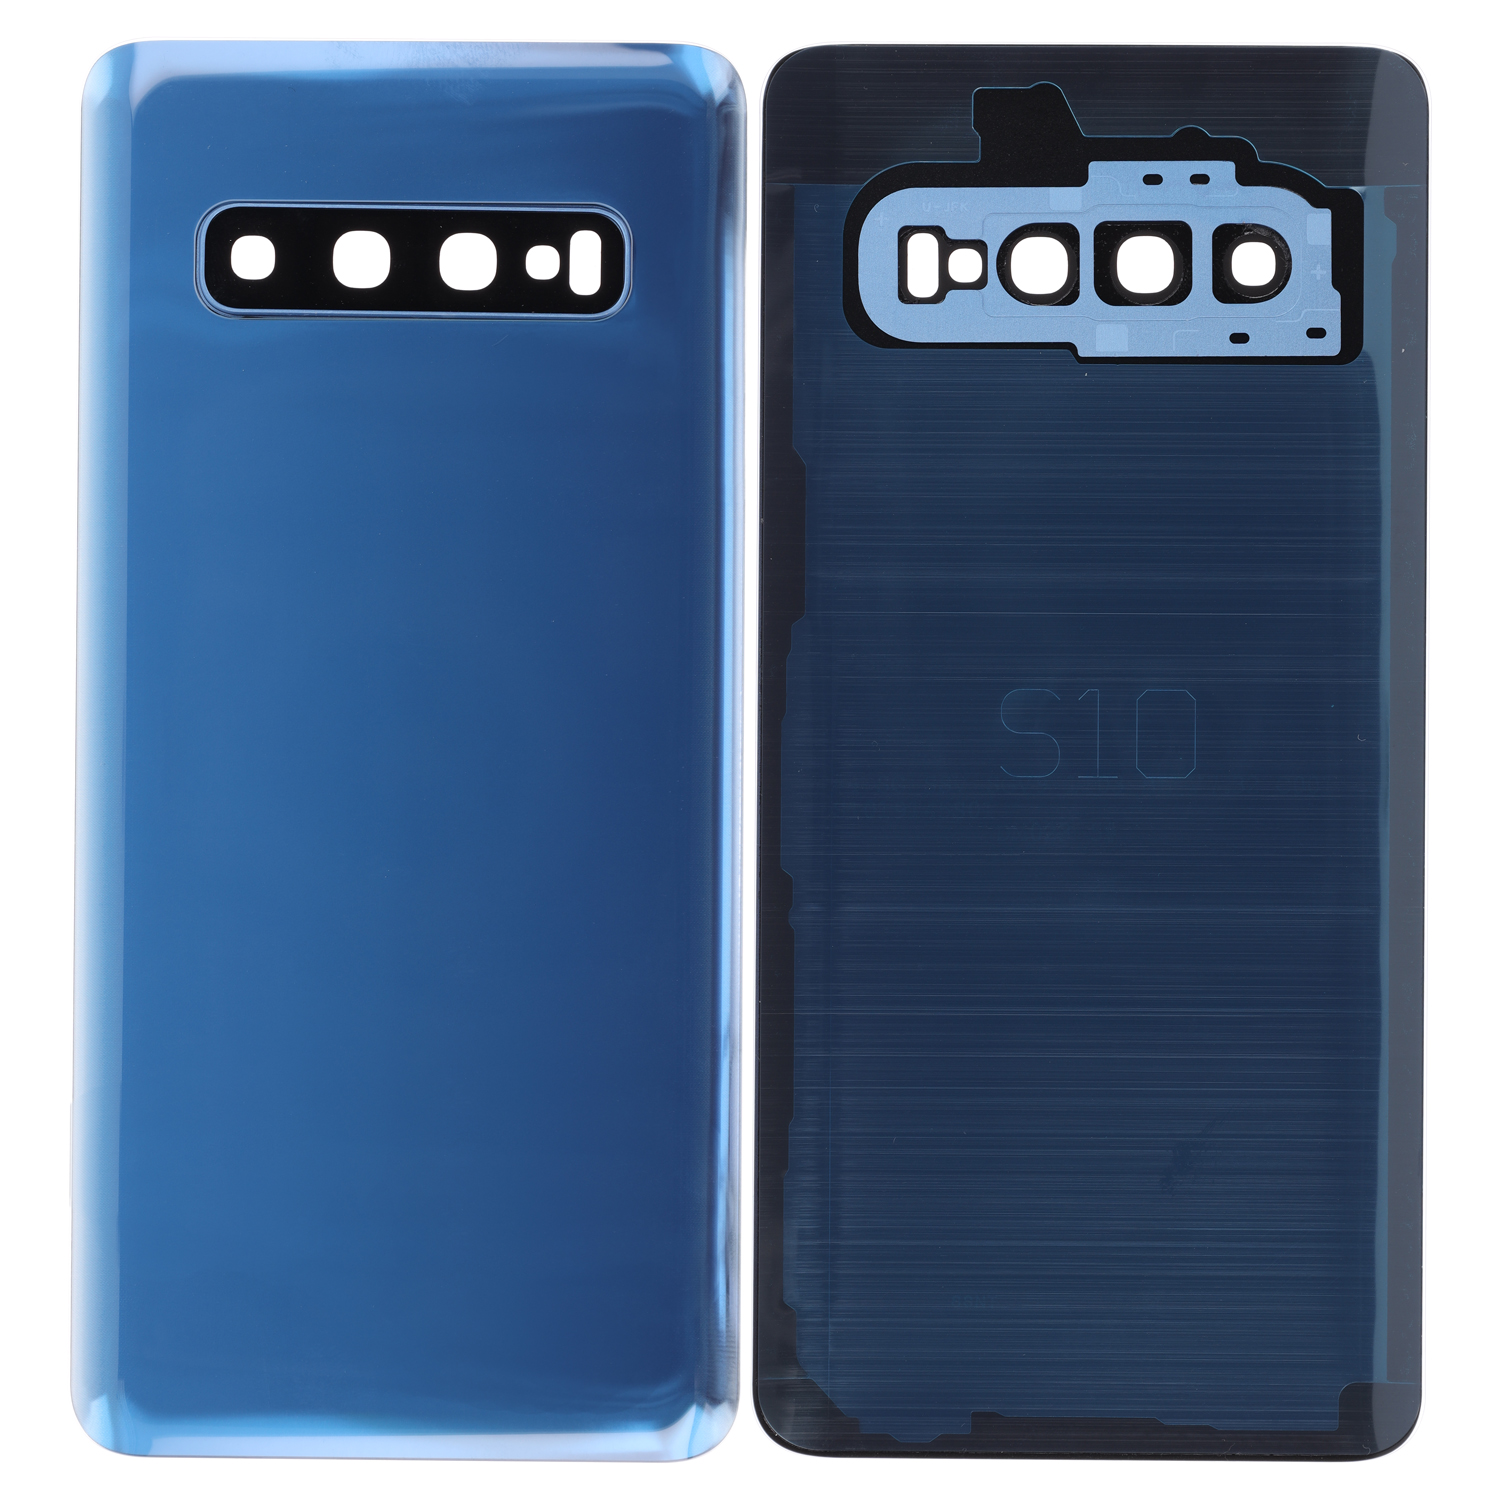 Battery Cover compatible to Samsung Galaxy S10 G973F, Prism Blue